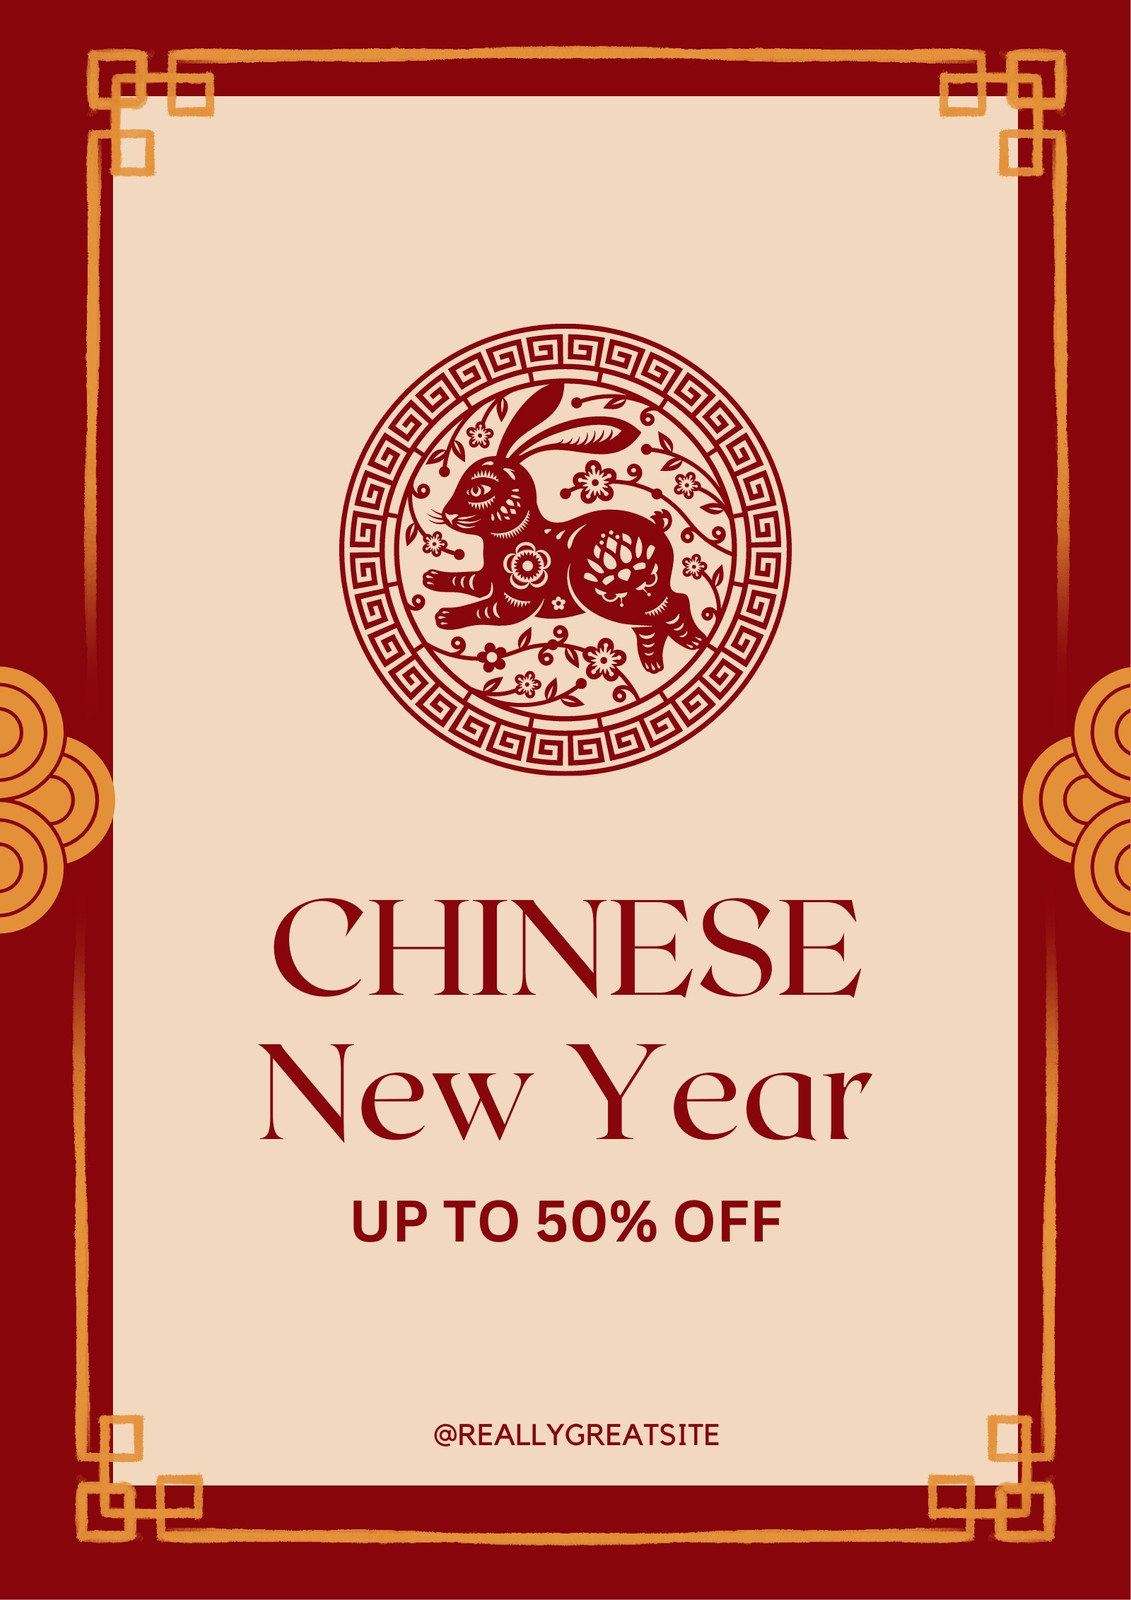 Red Envelope Chinese New Year Poster Template